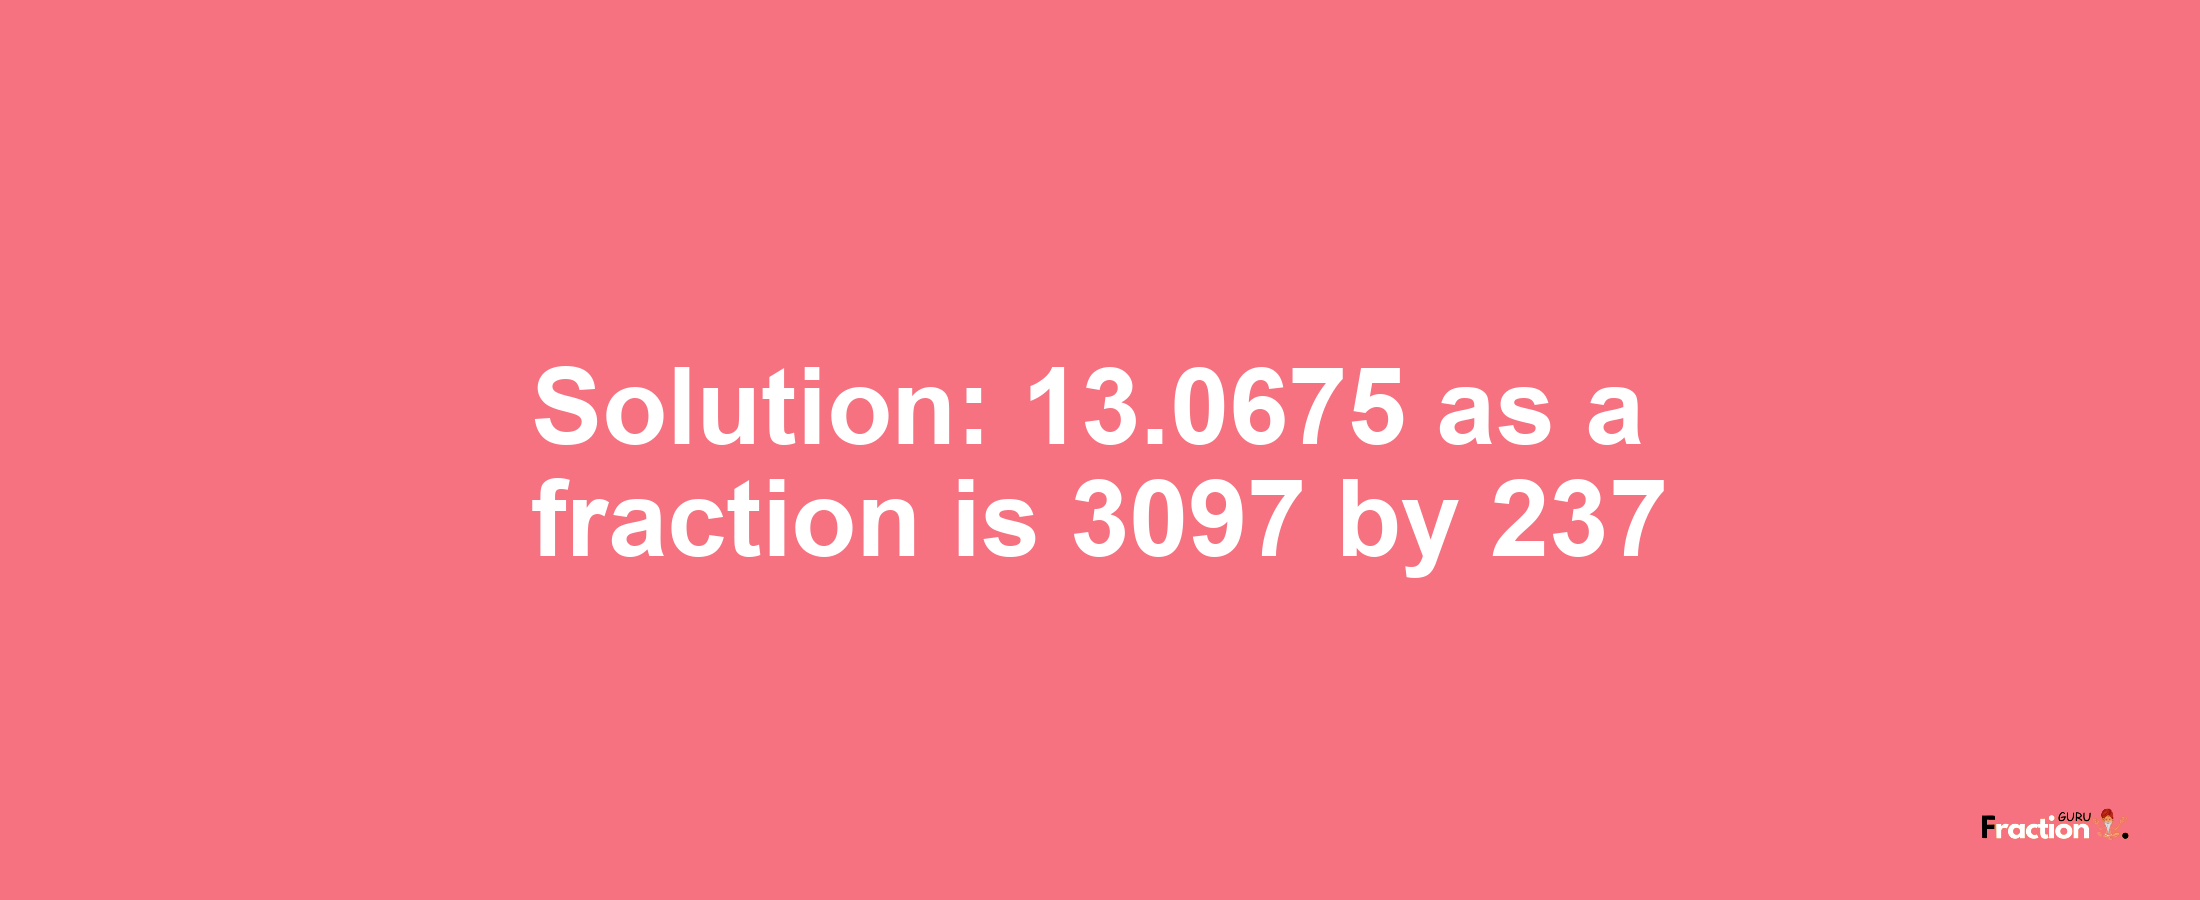 Solution:13.0675 as a fraction is 3097/237